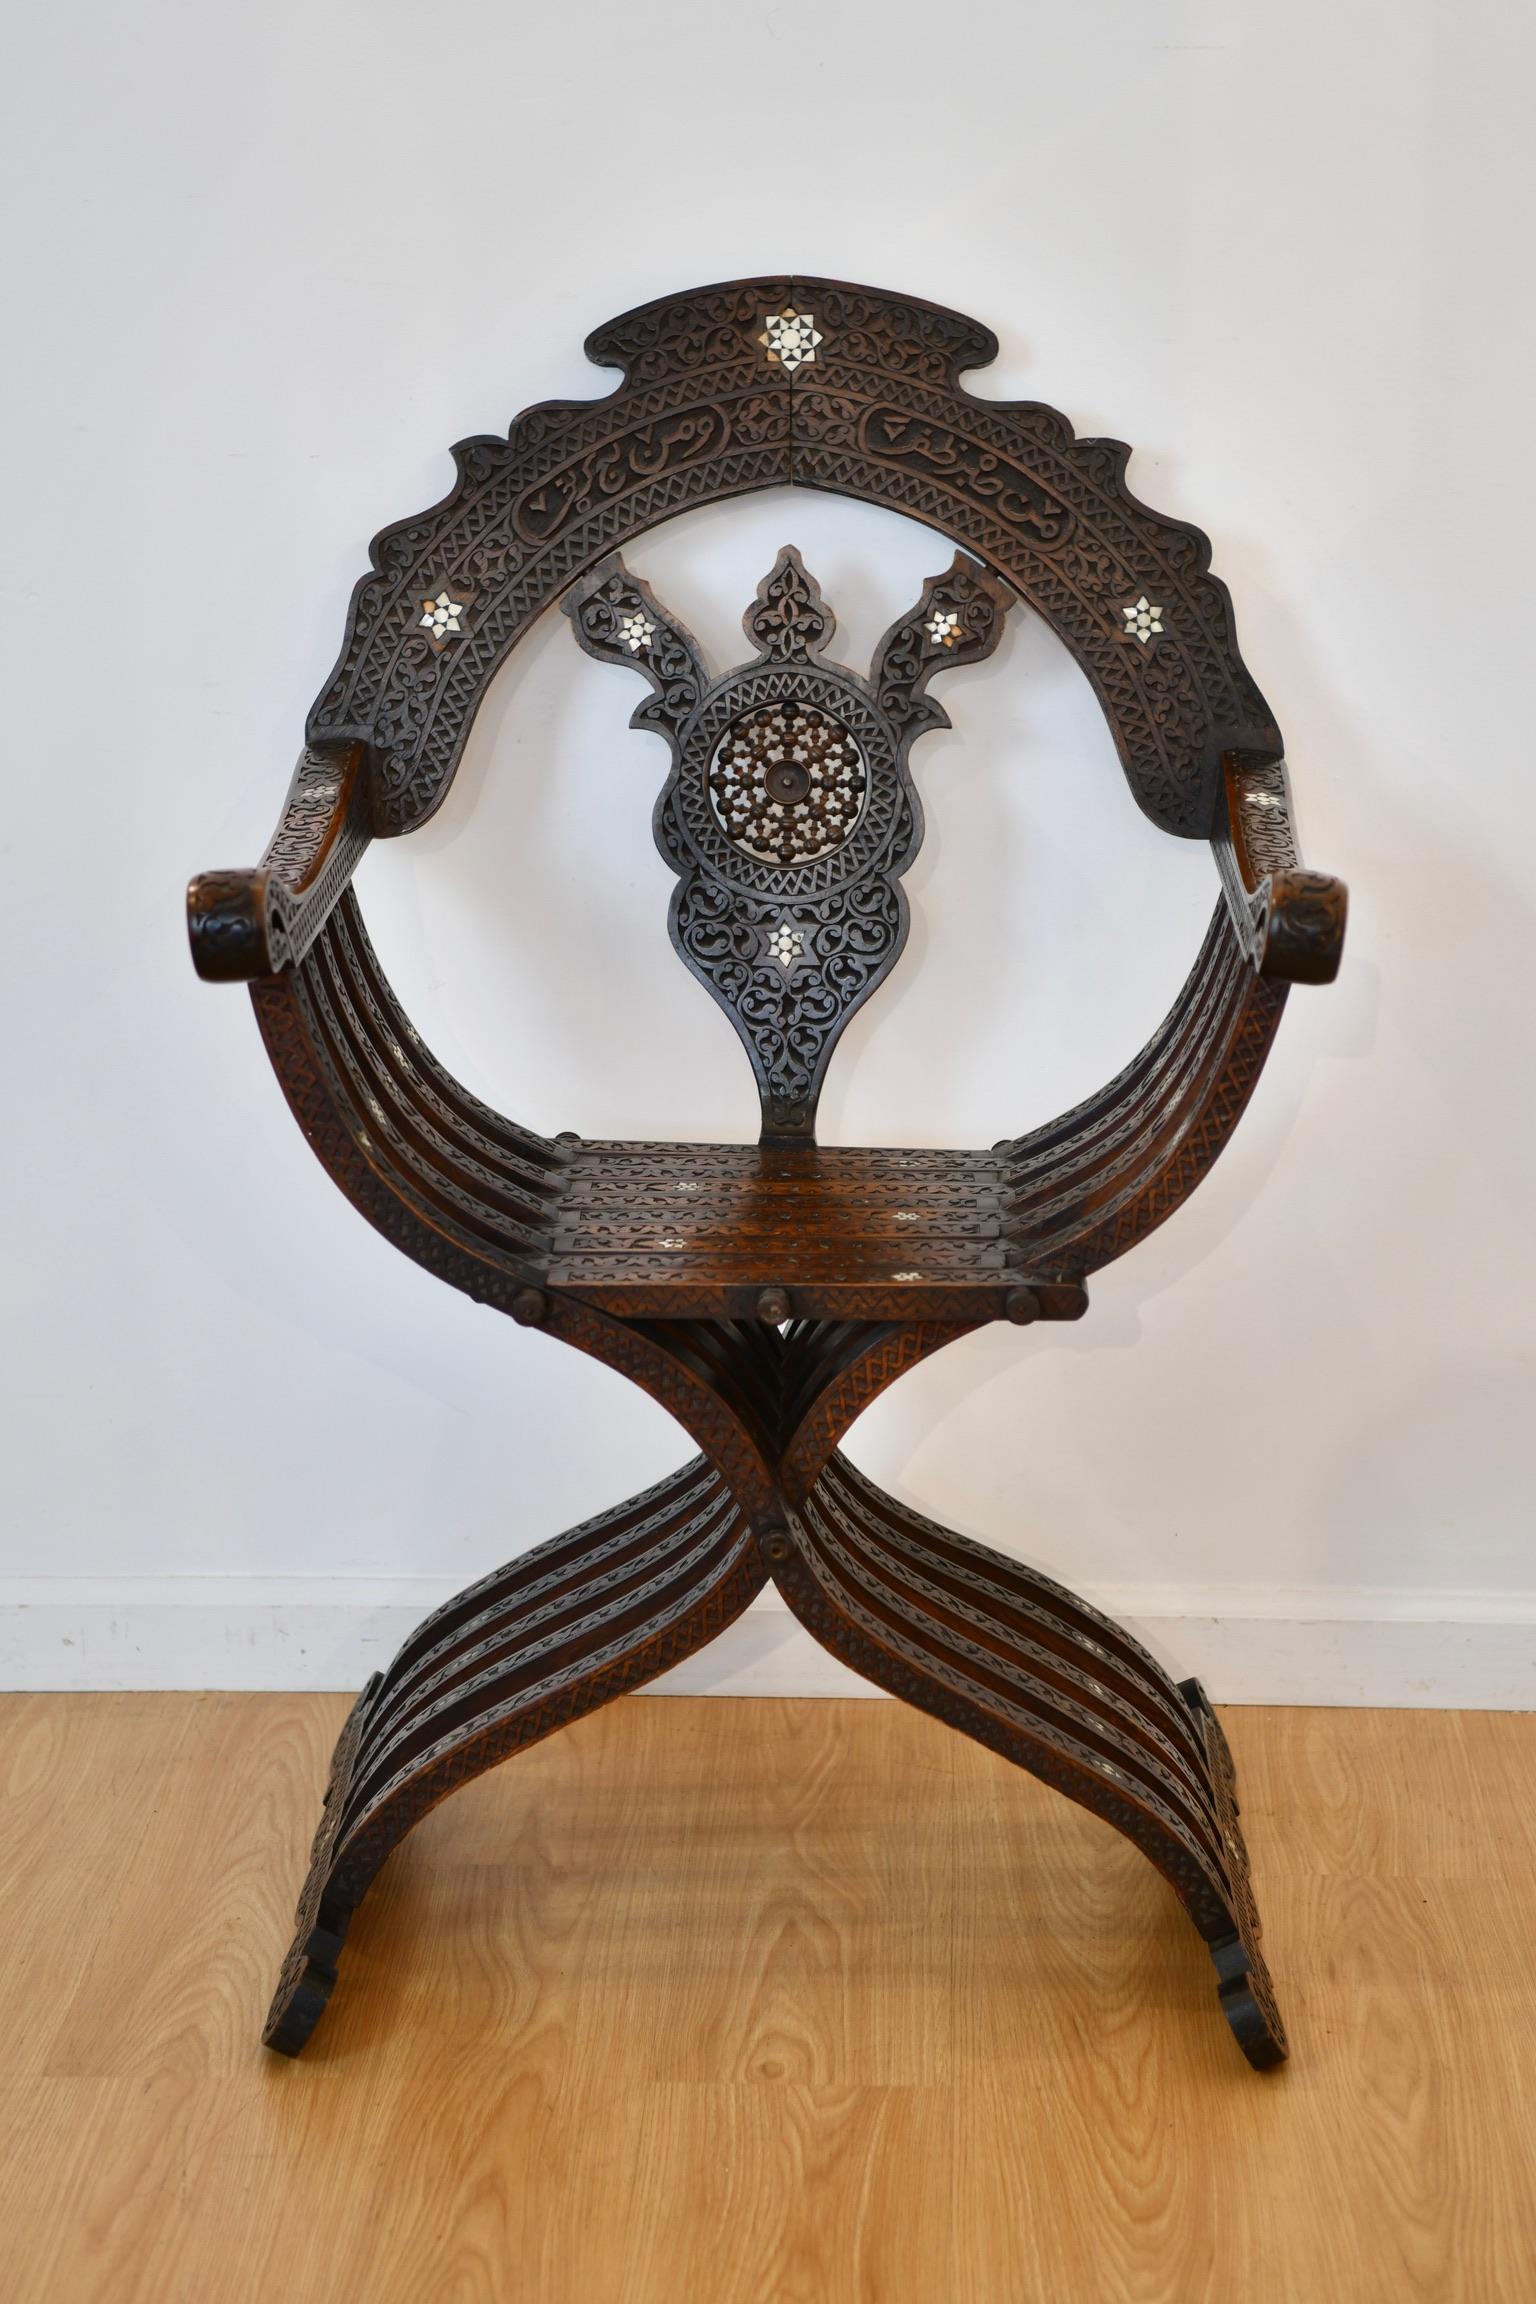 Moroccan carved and shell-inlaid folding Savonarola armchair with scrolling borders, mother of pearl star motifs, and Arabic inscription “من صبر ظفر ومن لج كفر”. Dimensions: 40.5